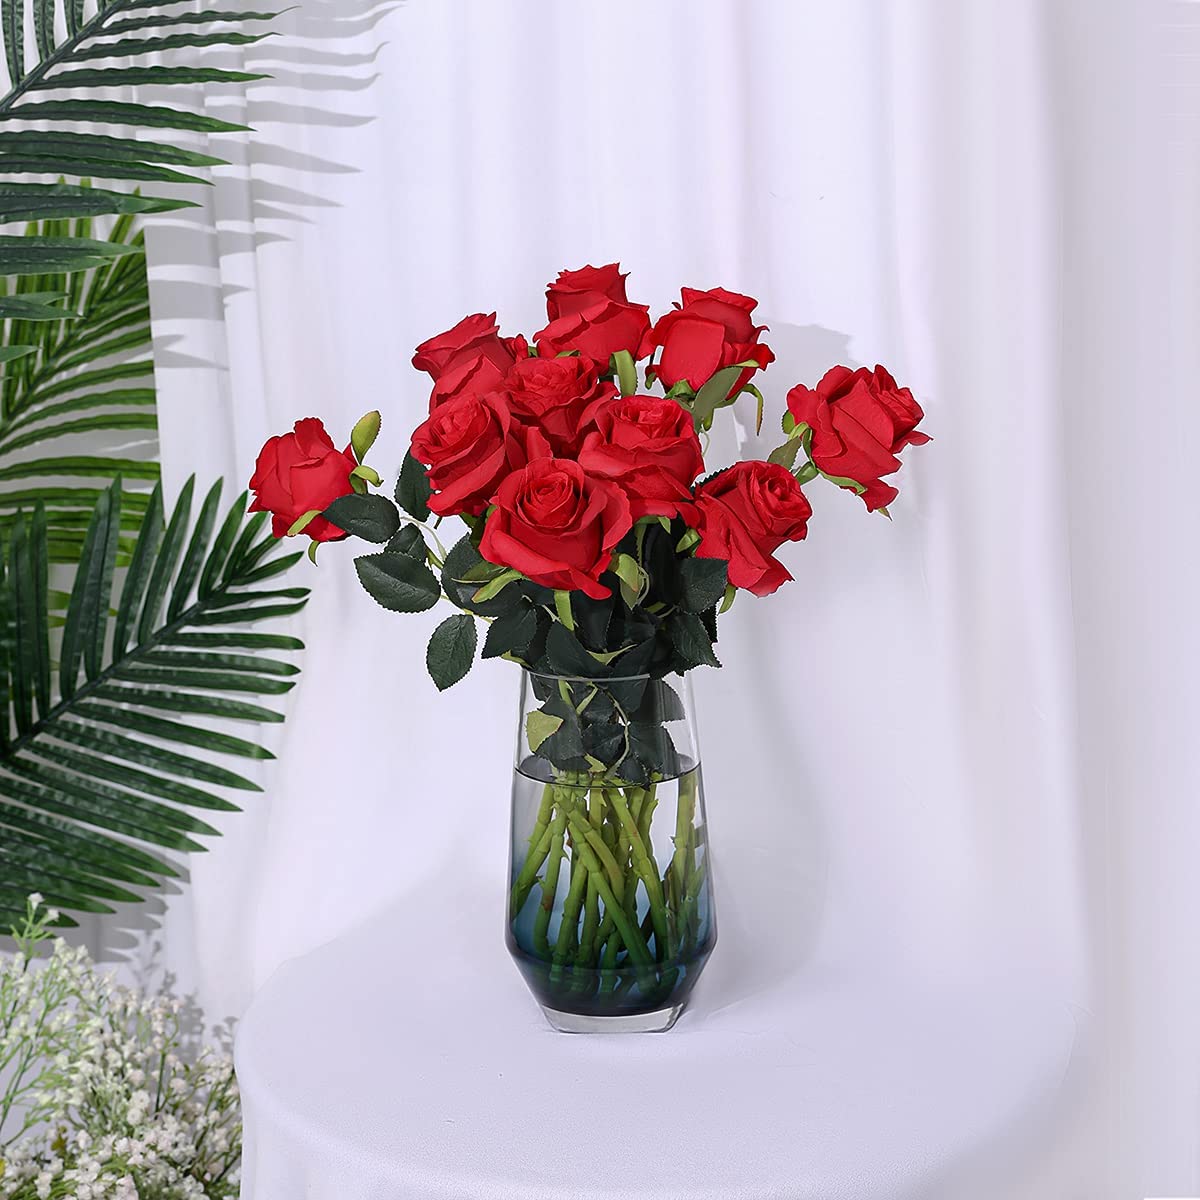 HomeXO 12 Pcs Rose Flowers Artificial Faux Silk Roses Height 10.6" Red Color ,12 pcs  Leaves and Stems Real Looking Roses Fake Rose for Vases DIY Bouquets for Wedding Bridal Shower Centerpieces (Red)